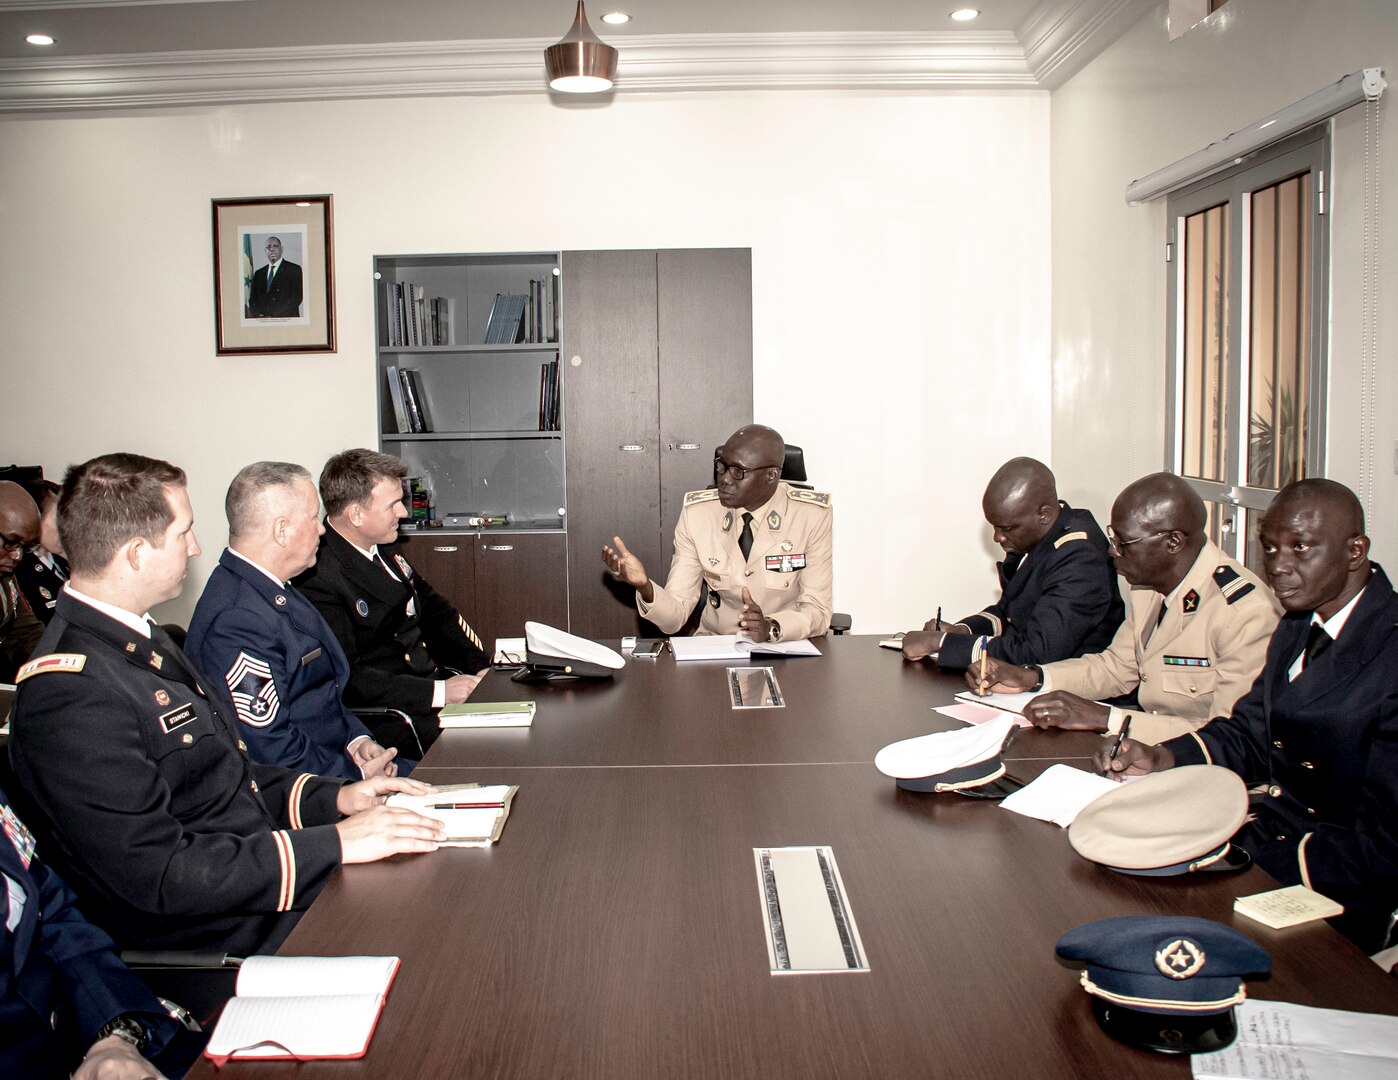 General Cheikh WADE - Deputy Chiefs D'Etat Major General Des Armees discussed the upcoming Key Leadership Engagement with the Deputy Chiefs D'Etat Major General Des Armess and the Senegalese Armed Forces service chiefs in Dakal, Senegal, Jan. 23, 2020. (U.S. Army photo by Takisha Miller)